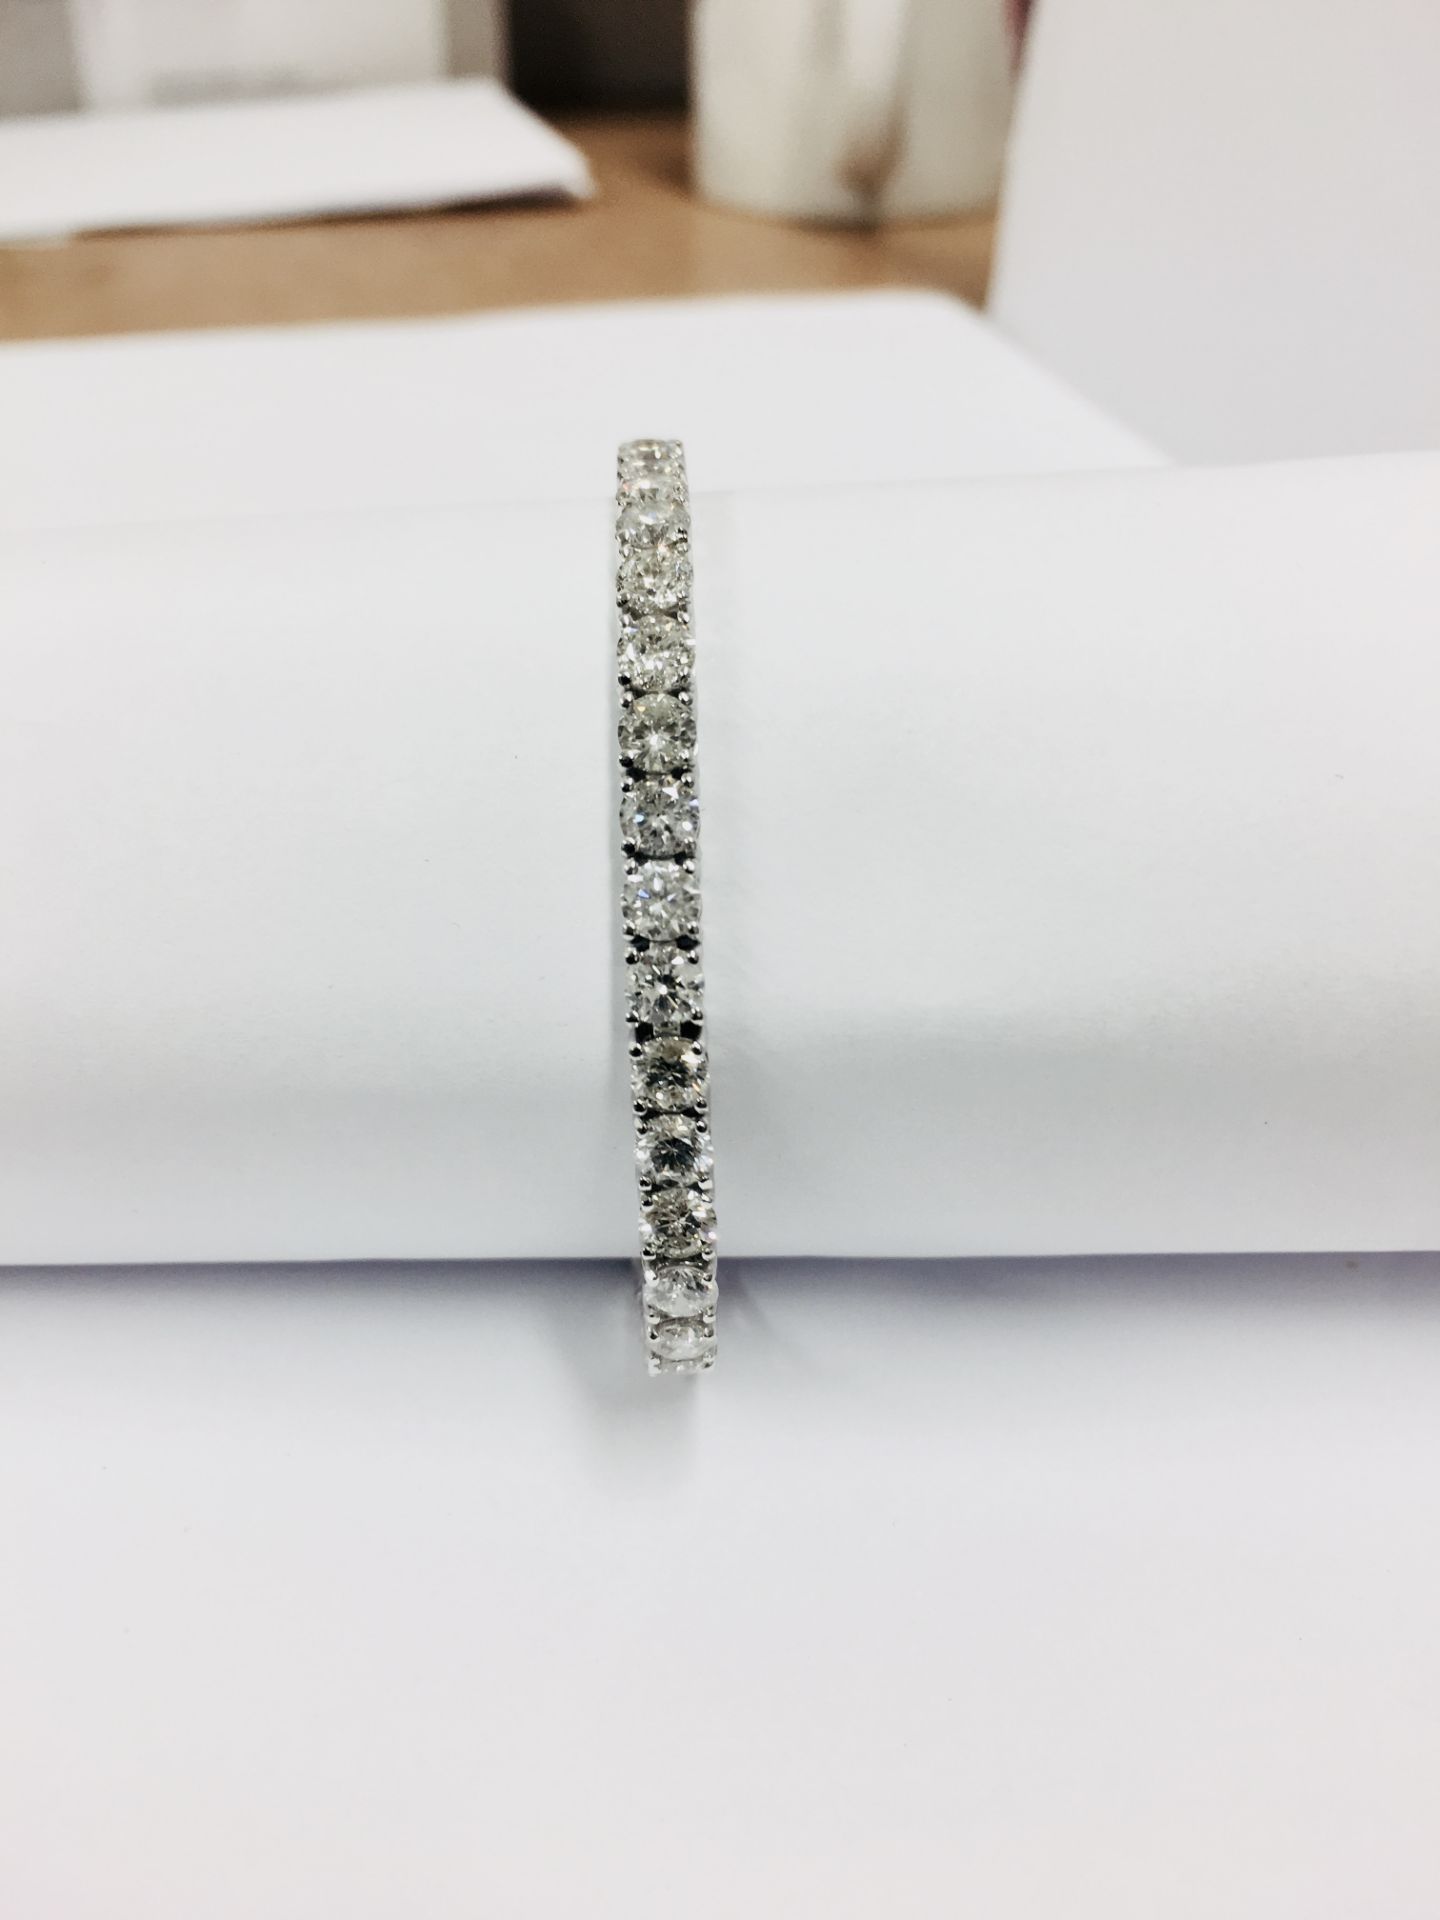 10.50ct Diamond tennis bracelet set with brilliant cut diamonds of I colour, si2 clarity. All set in - Image 5 of 7